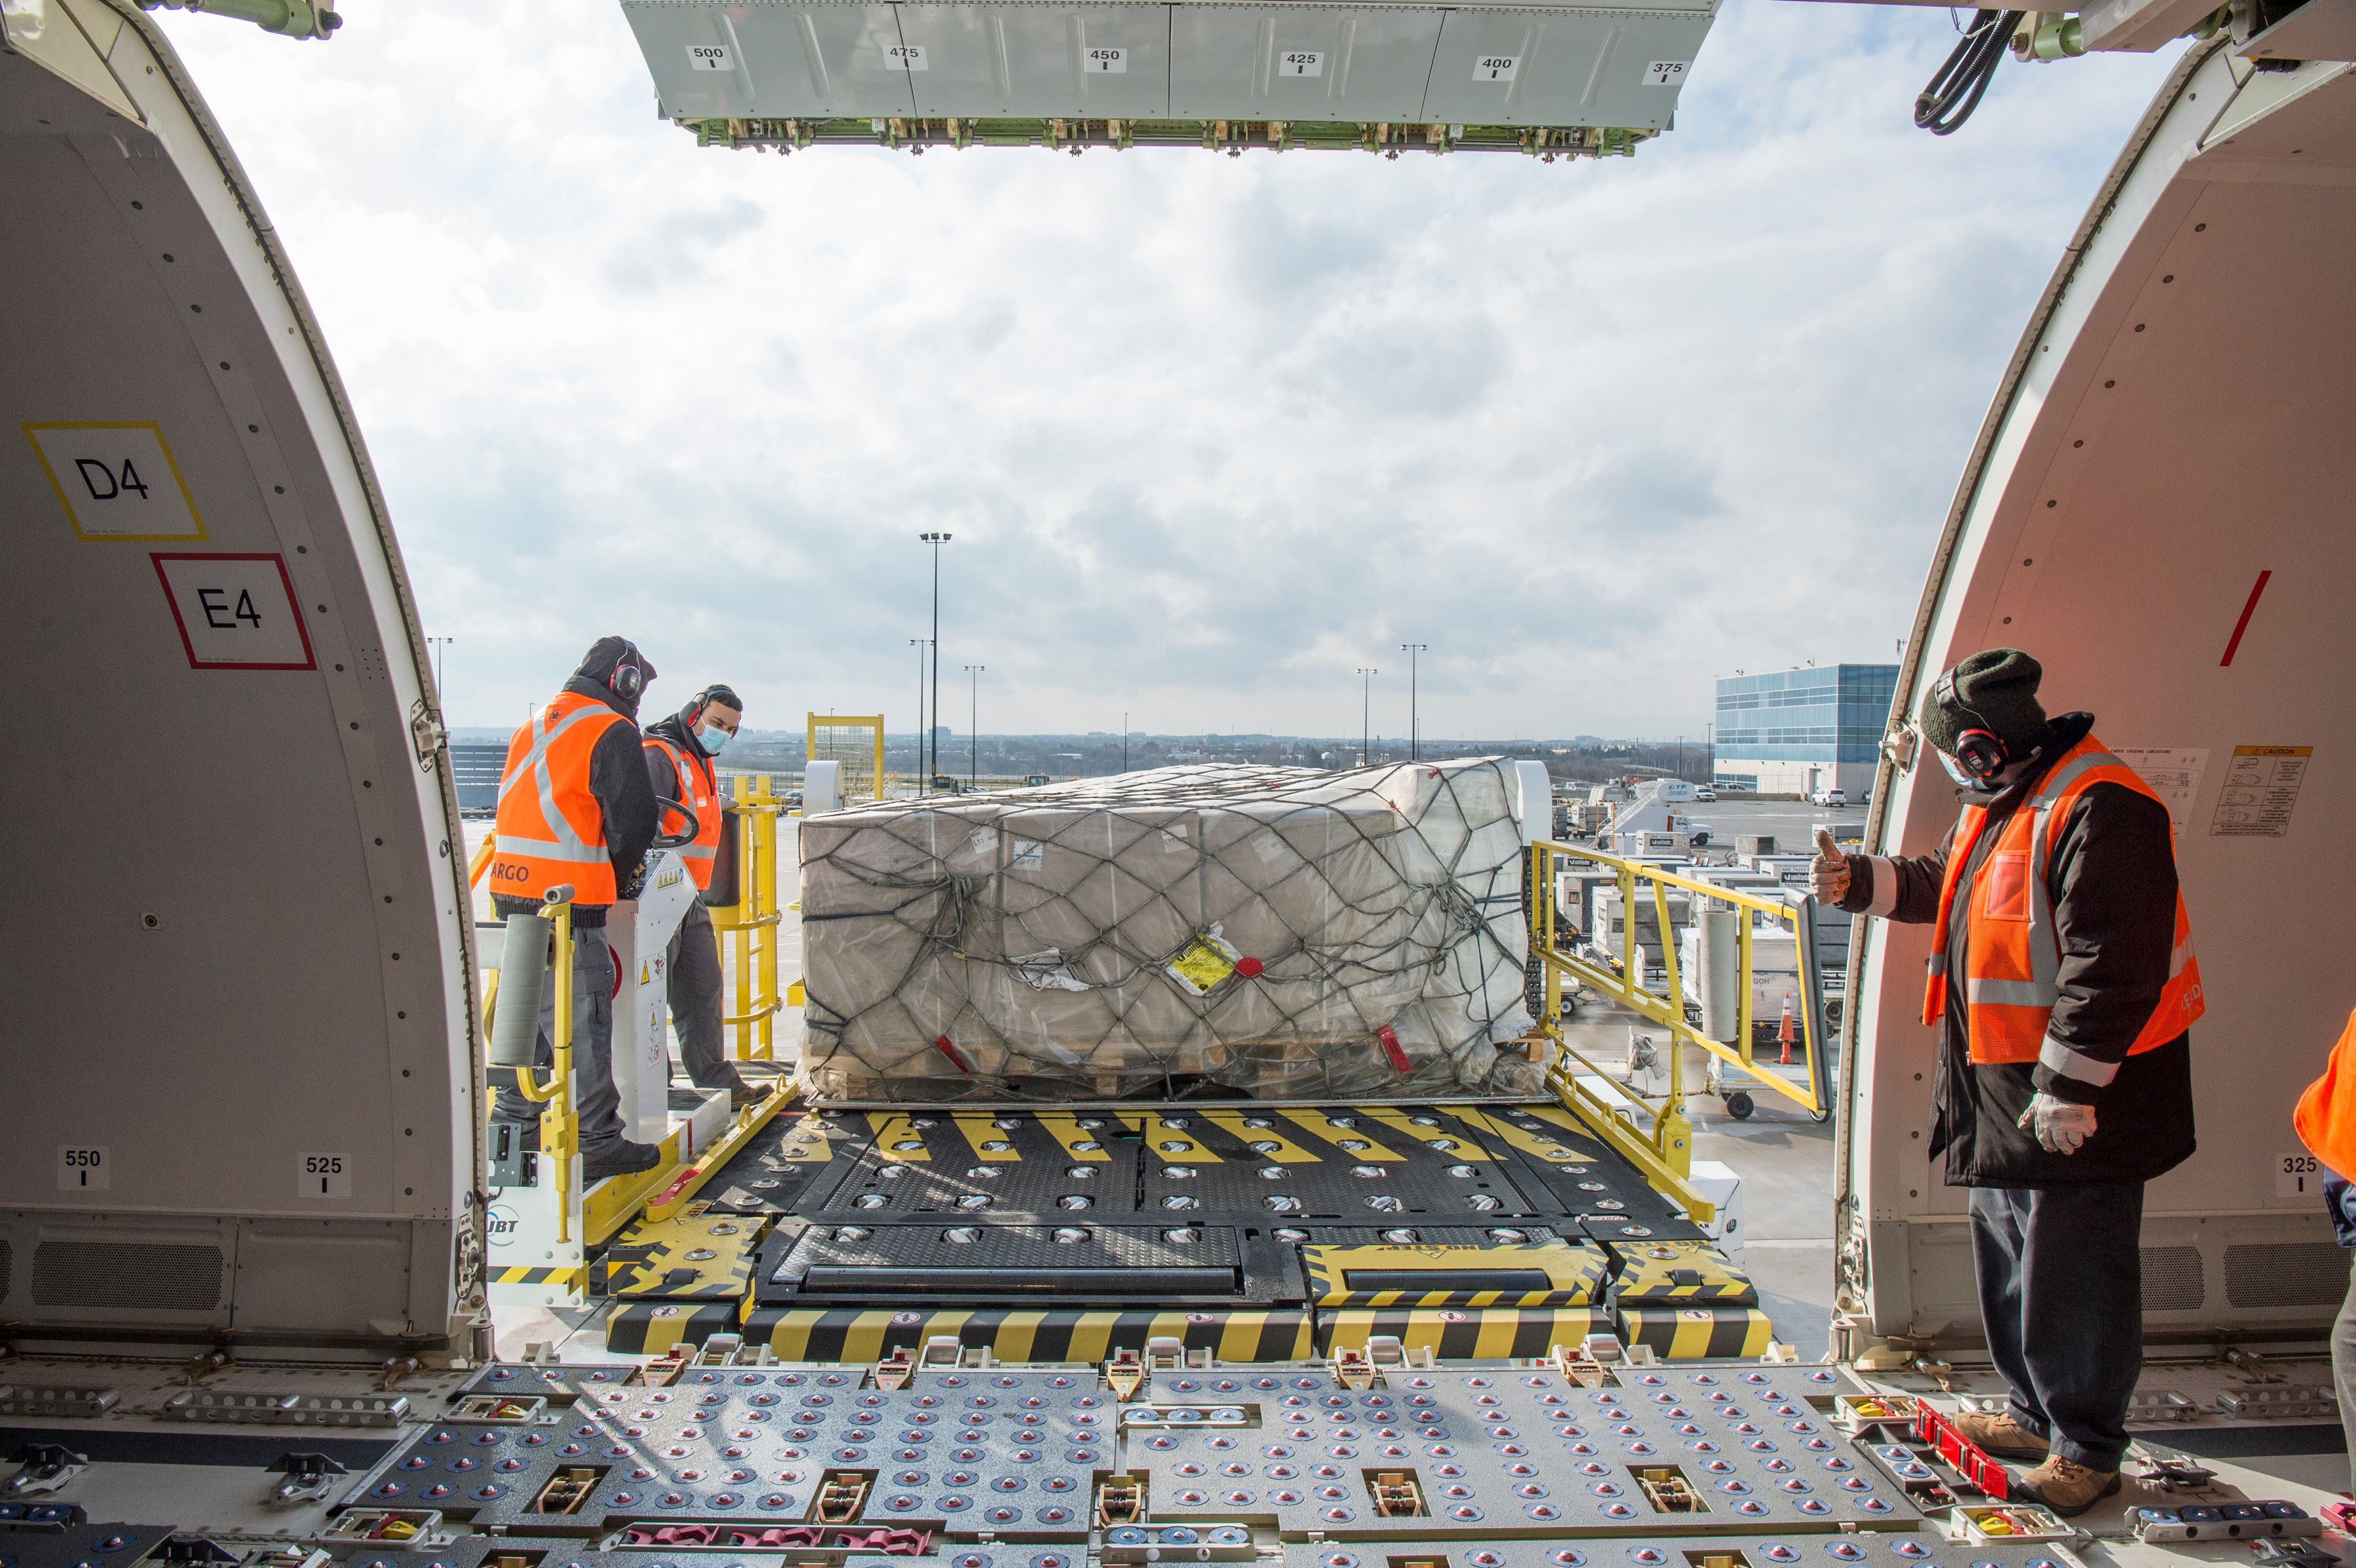 Air_Canada -freighter-loading-cargo (1)